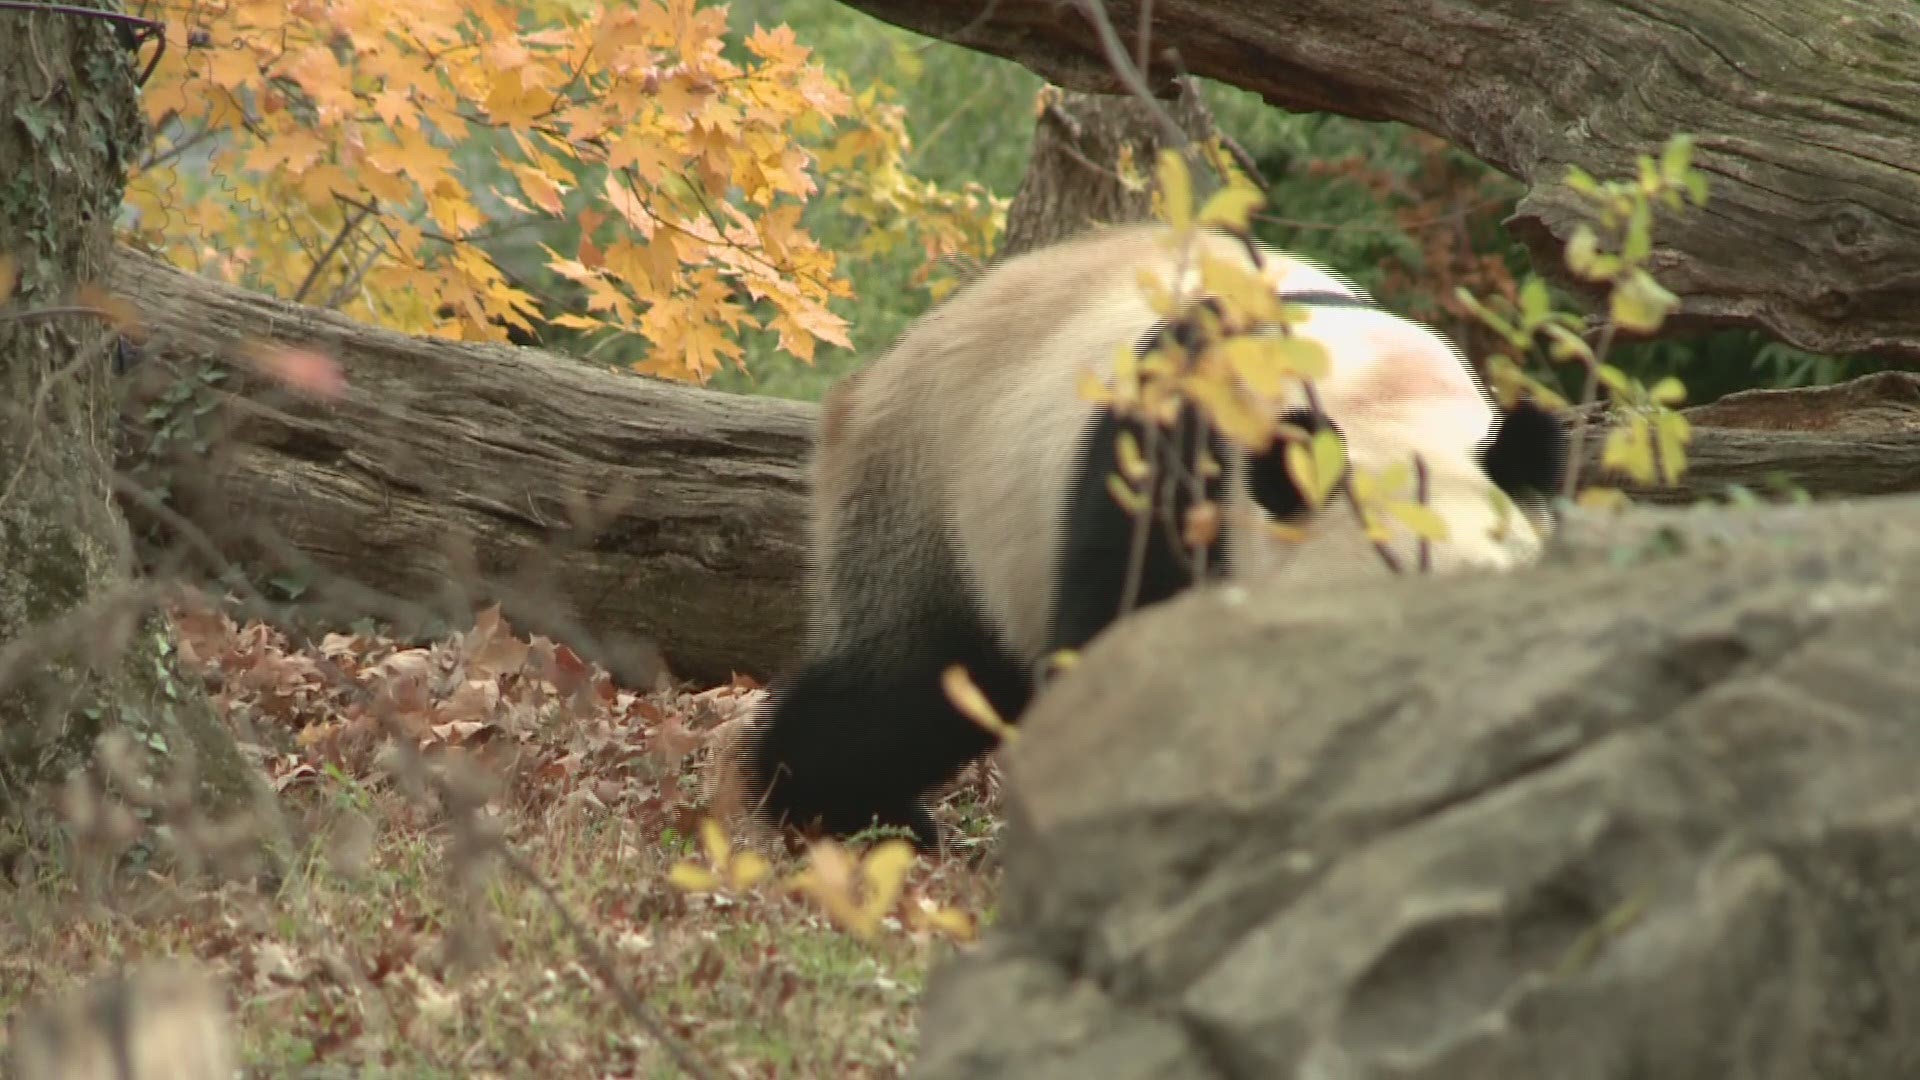 Bei Bei heads to China Tuesday, but there's still time to say goodbye.